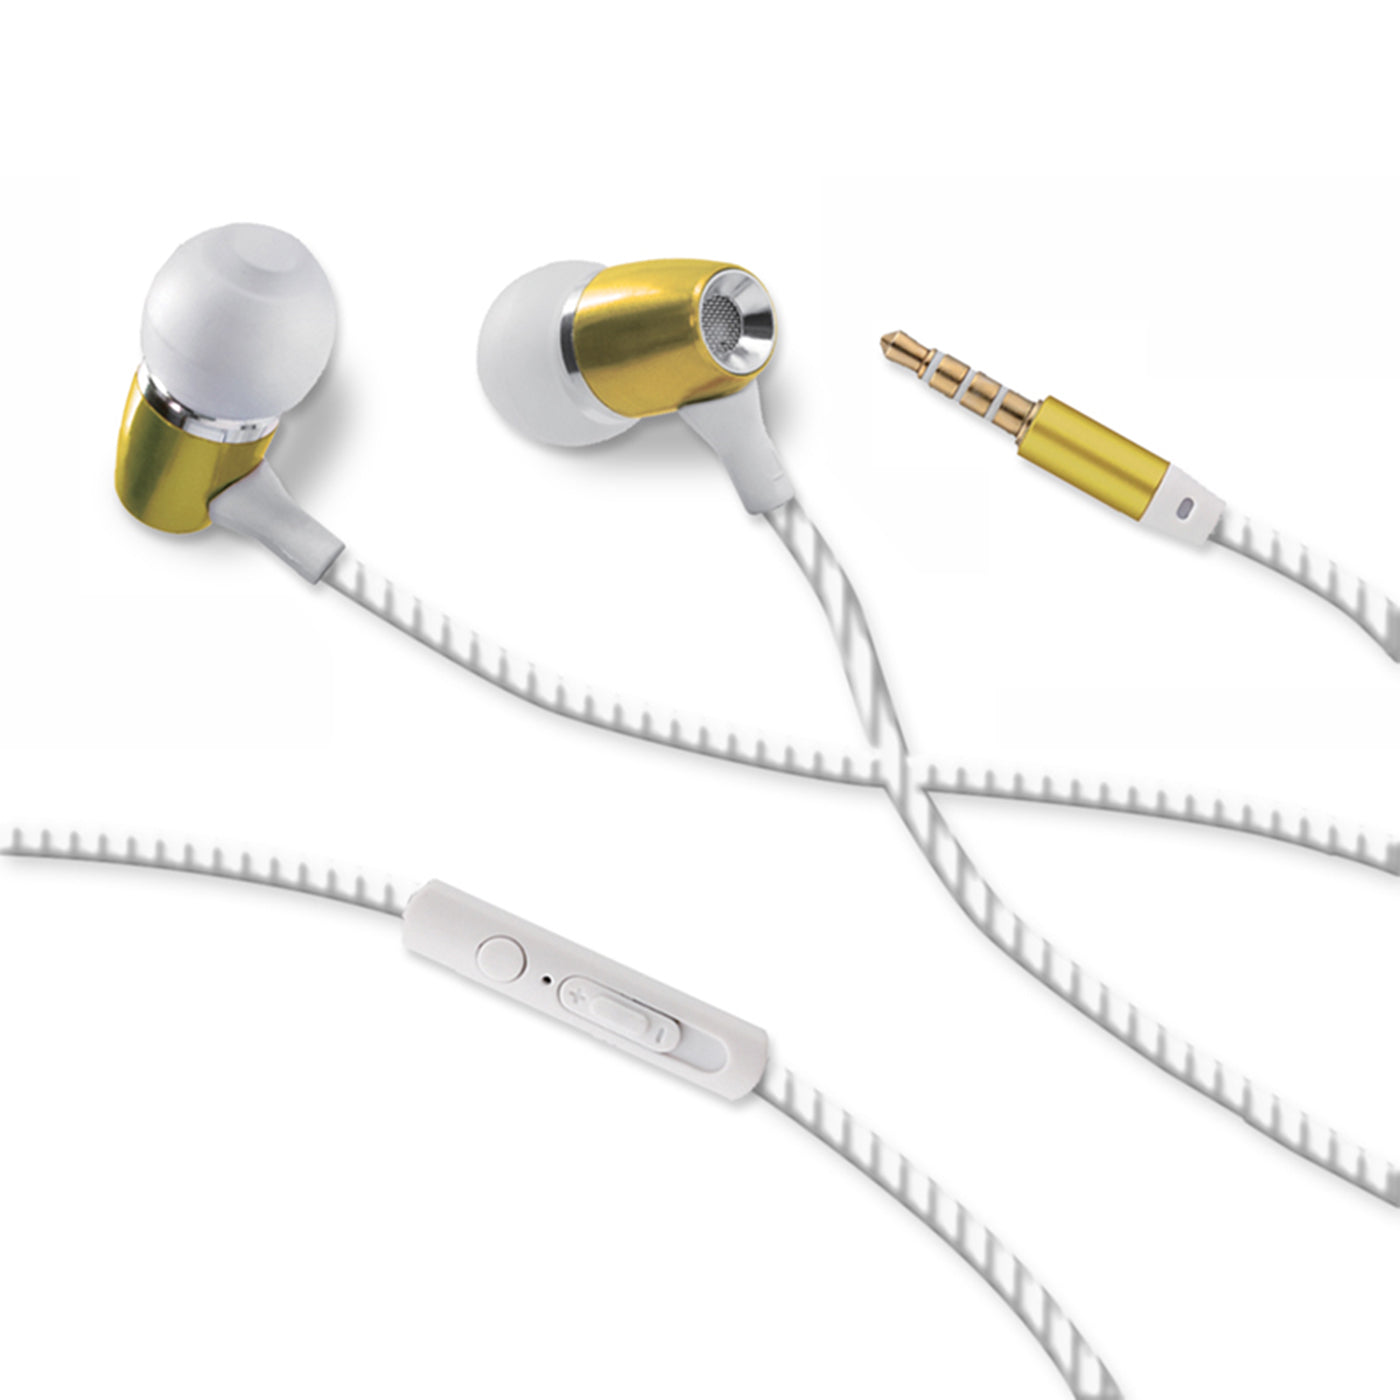 Headphones Headsets Earbuds Wired In-Ear Bass H350 With Microphone Stereo Gold Color